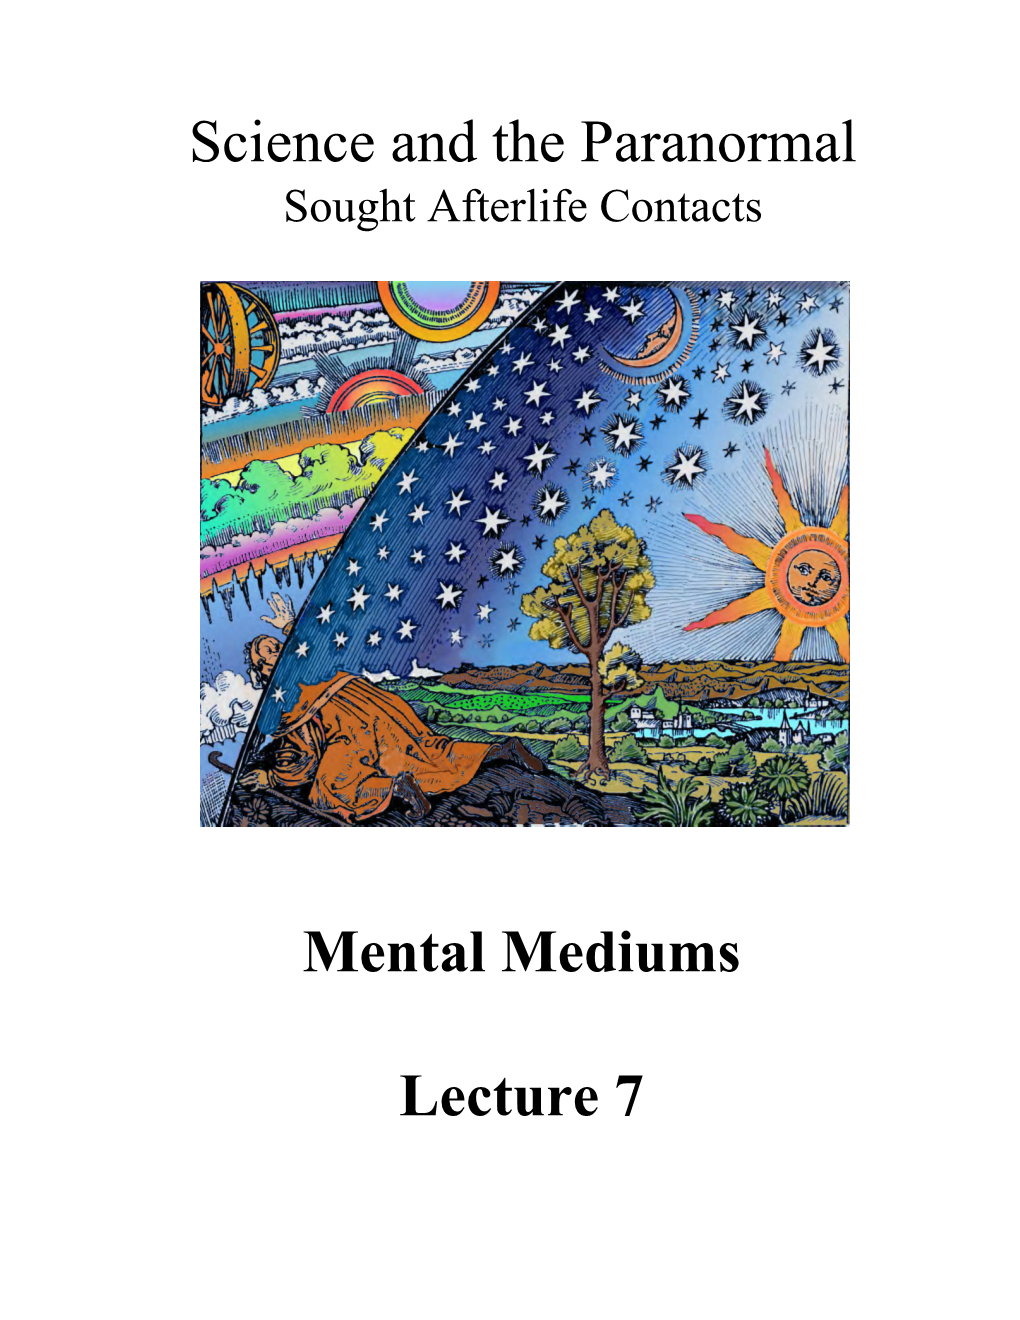 Lecture 7 Mental Mediums